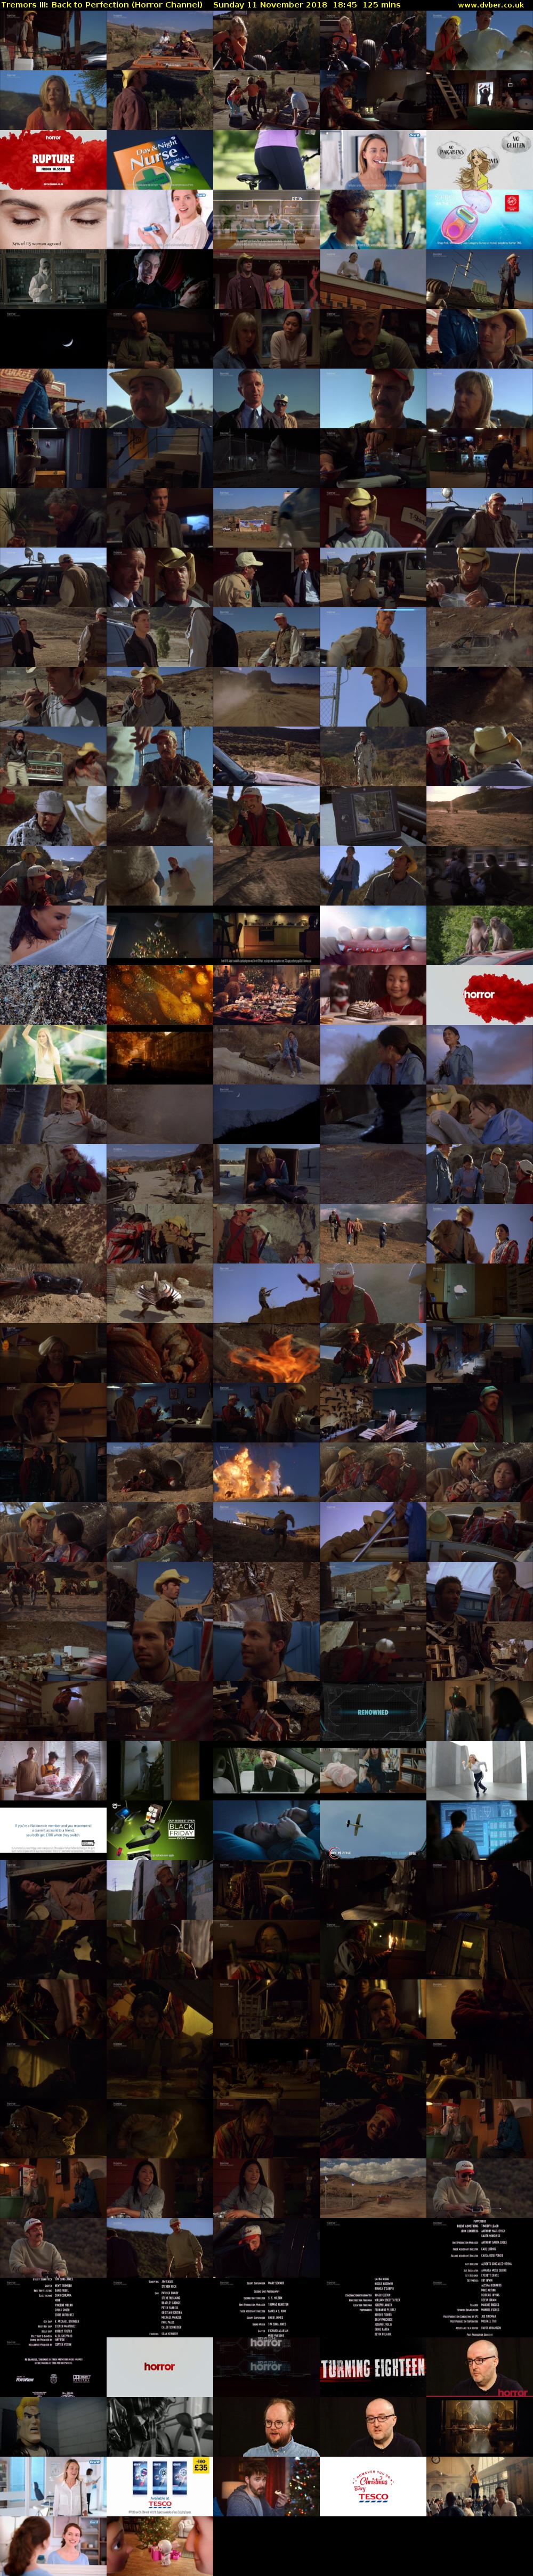 Tremors III: Back to Perfection (Horror Channel) Sunday 11 November 2018 18:45 - 20:50